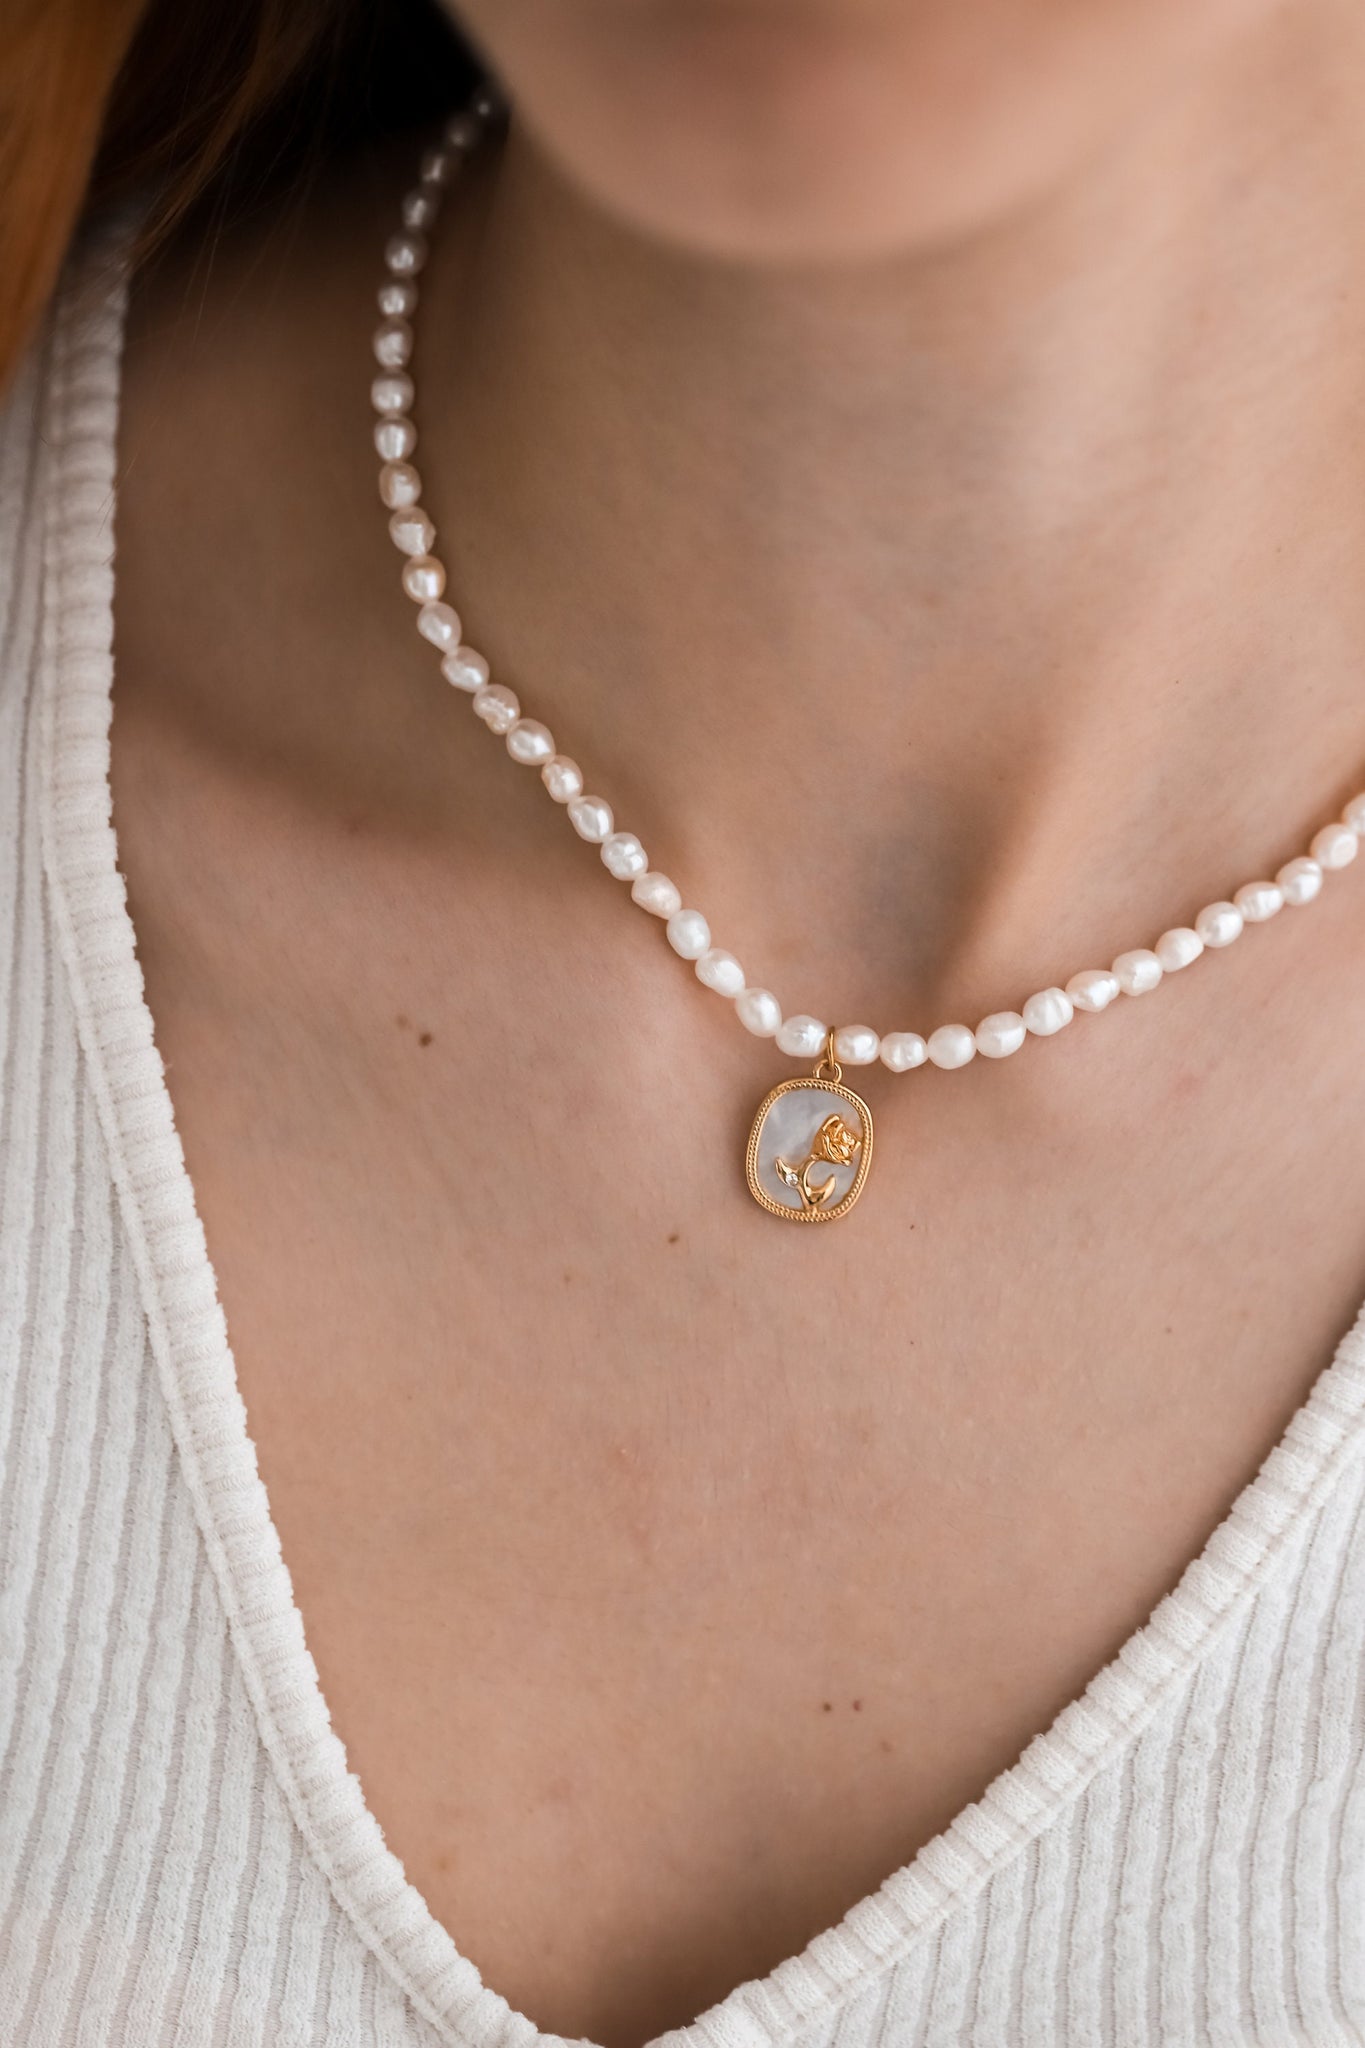 Rose Flower Necklace, 18K Gold, Mothers Day Gift, Floral Pearl Necklace, Gift For Mom, Flower Jewelry, Bridesmaid Necklace, Unique Jewelry